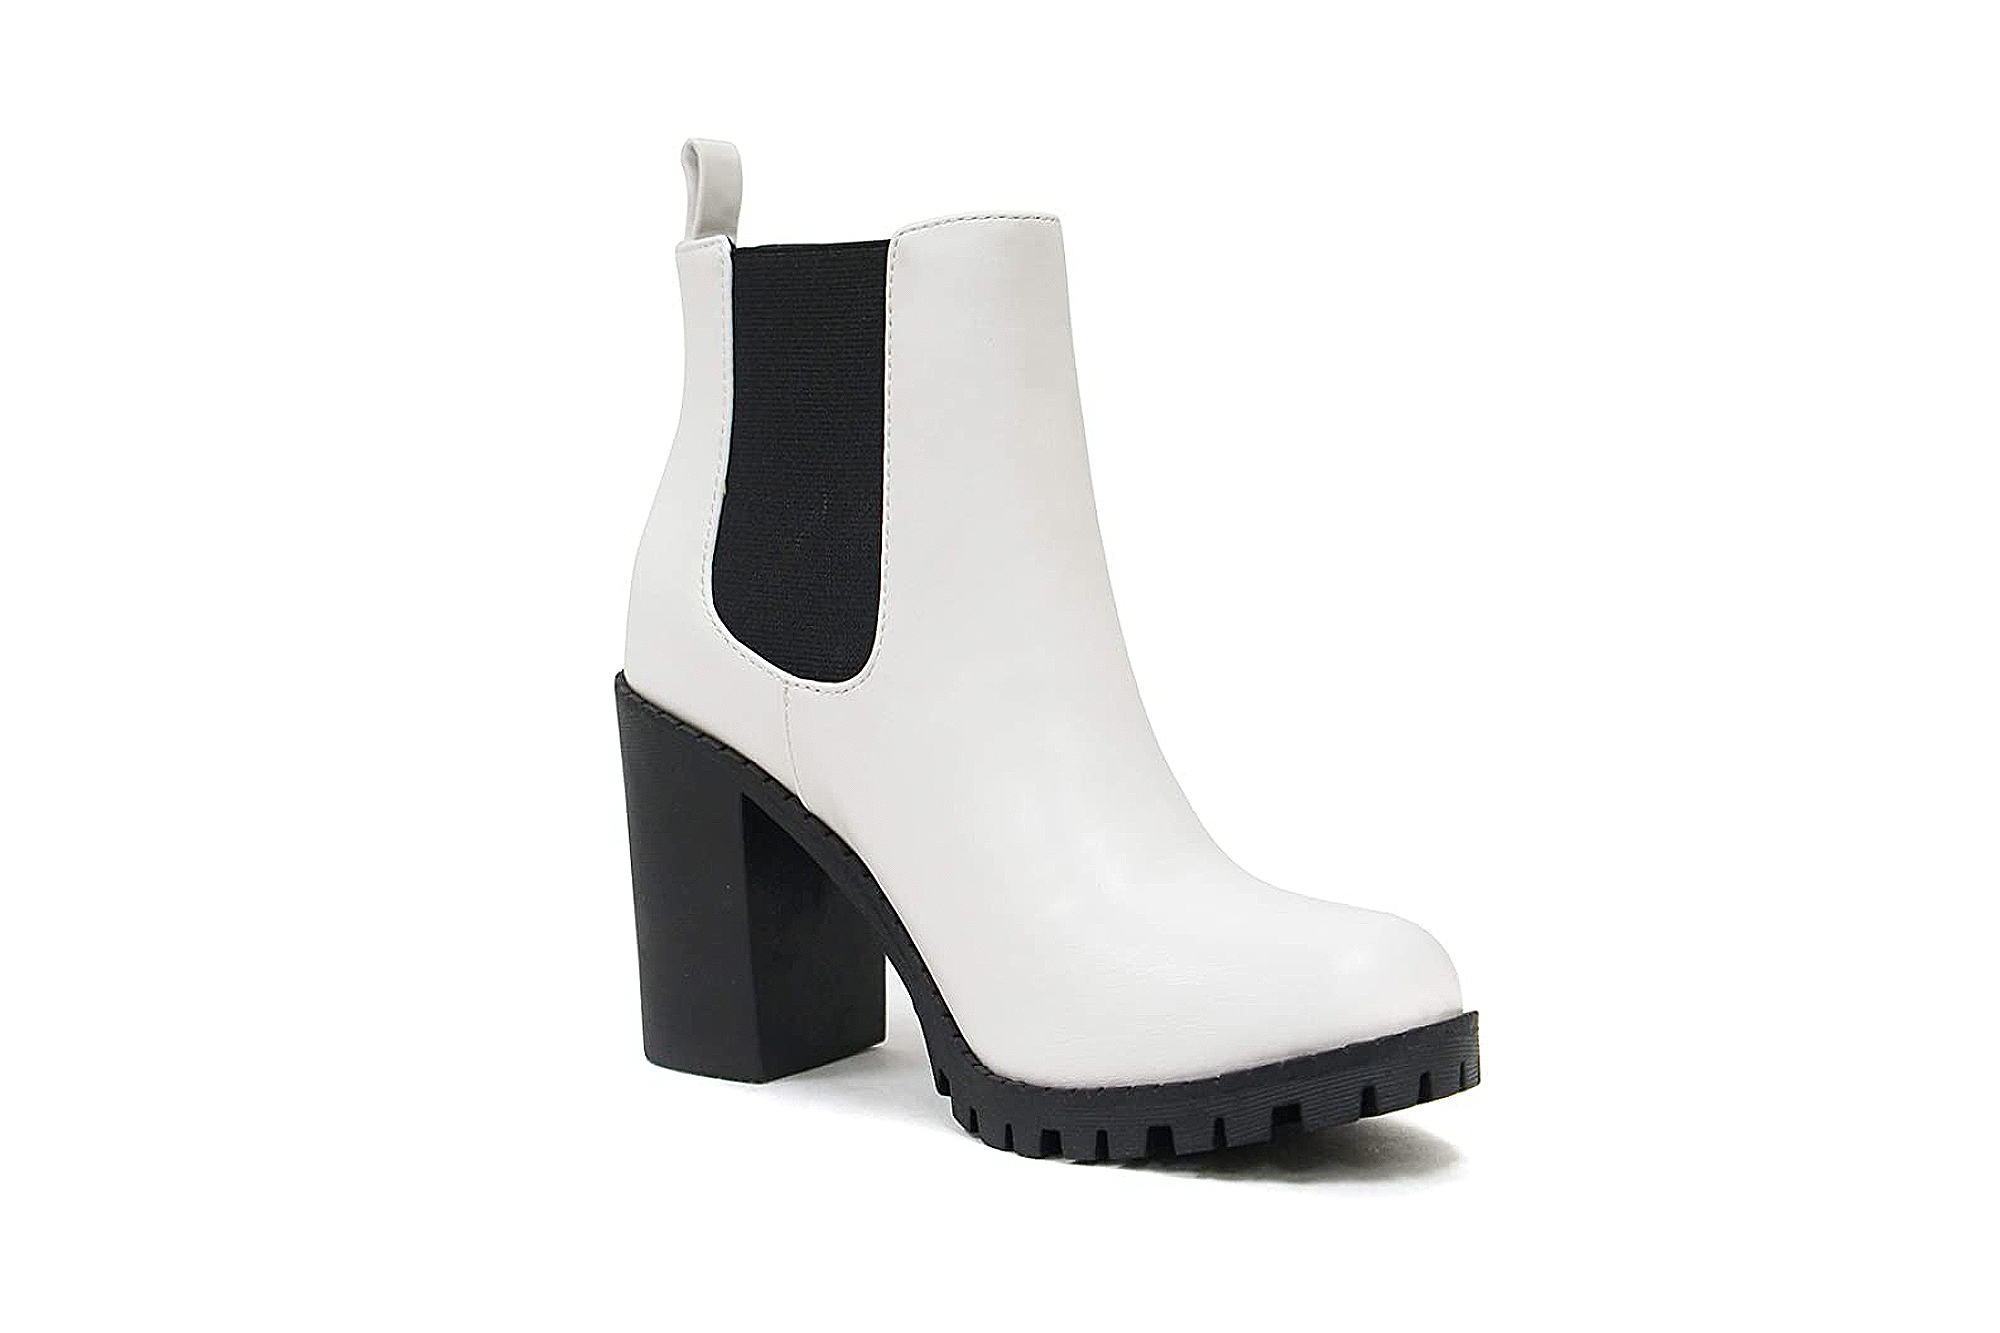 Details about   Luxemoda Glove Ankle Boot w/Lug Sole Elastic Gore and Chunky Heel 